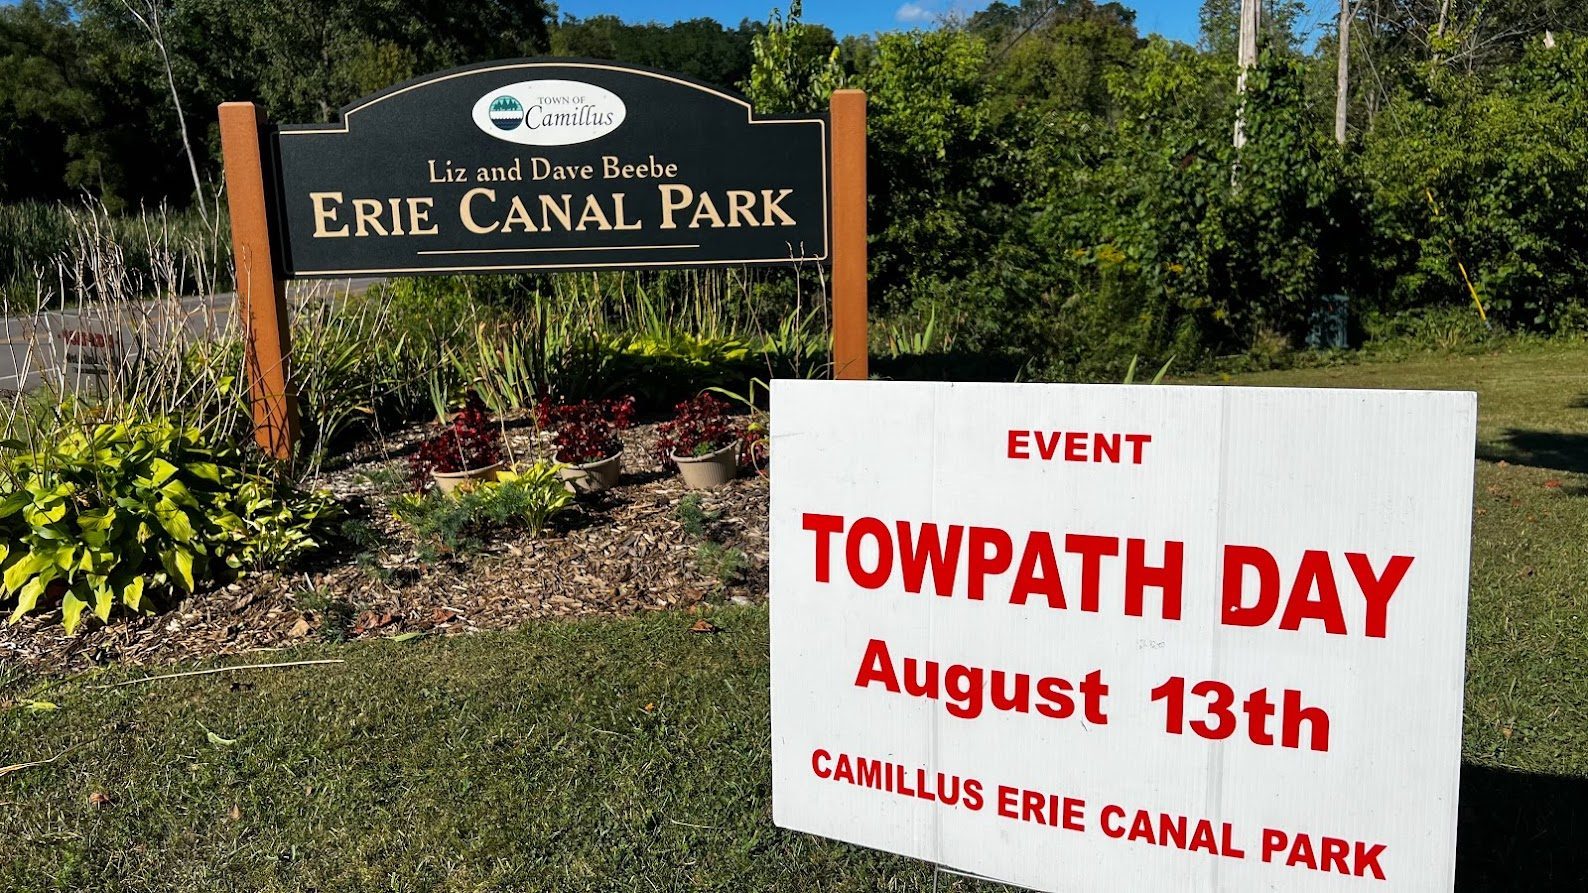 A sign for TowPath Day is displayed in front of the entrance to the Camillus Erie Canal Park